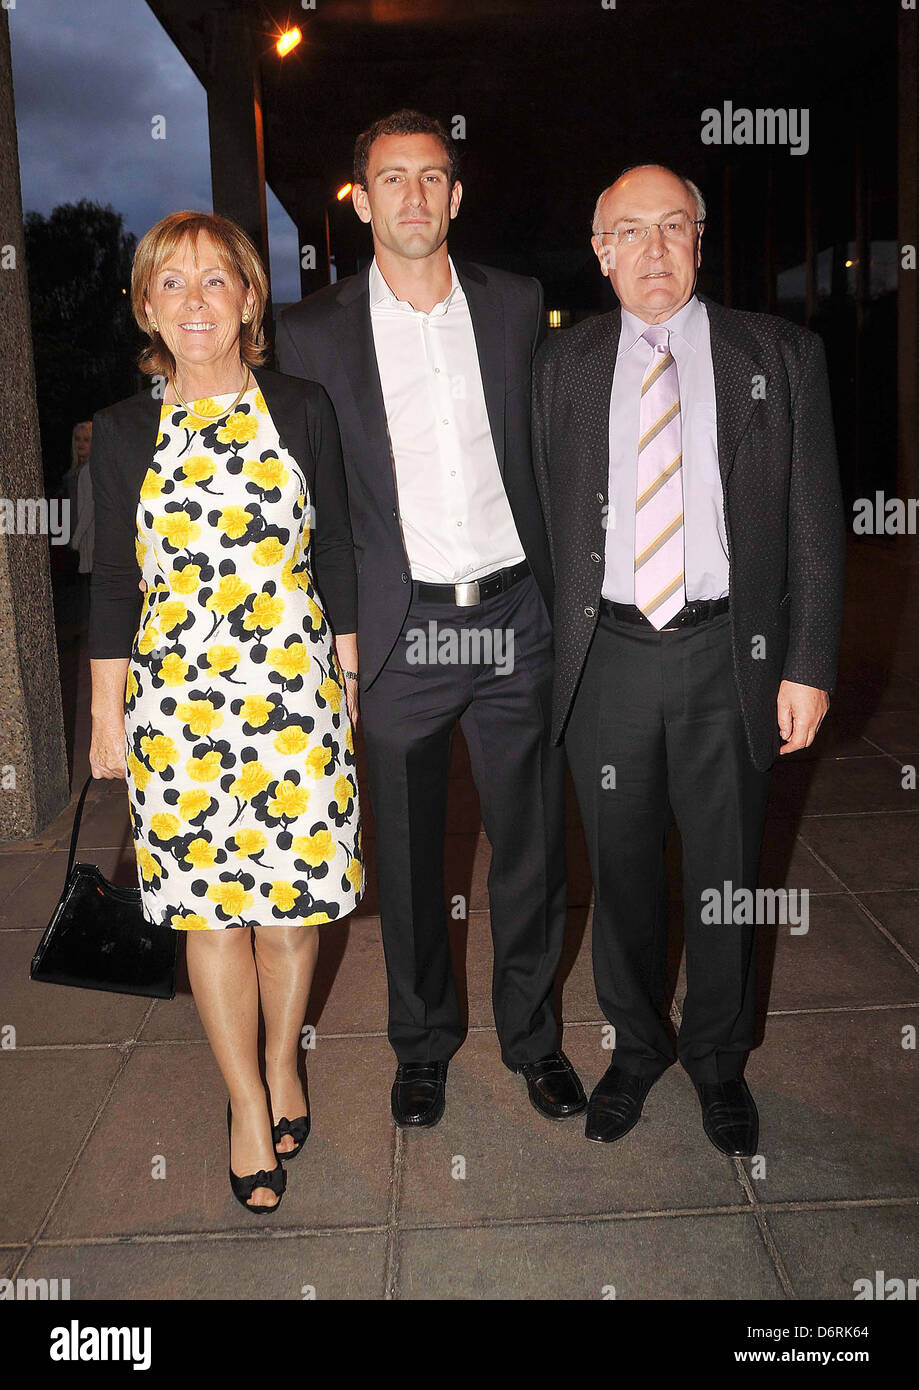 Irish professional tennis player Conor Niland and his parents at RTE  studios for the Late Late Show Dublin, Ireland - 02.09.11 Stock Photo -  Alamy